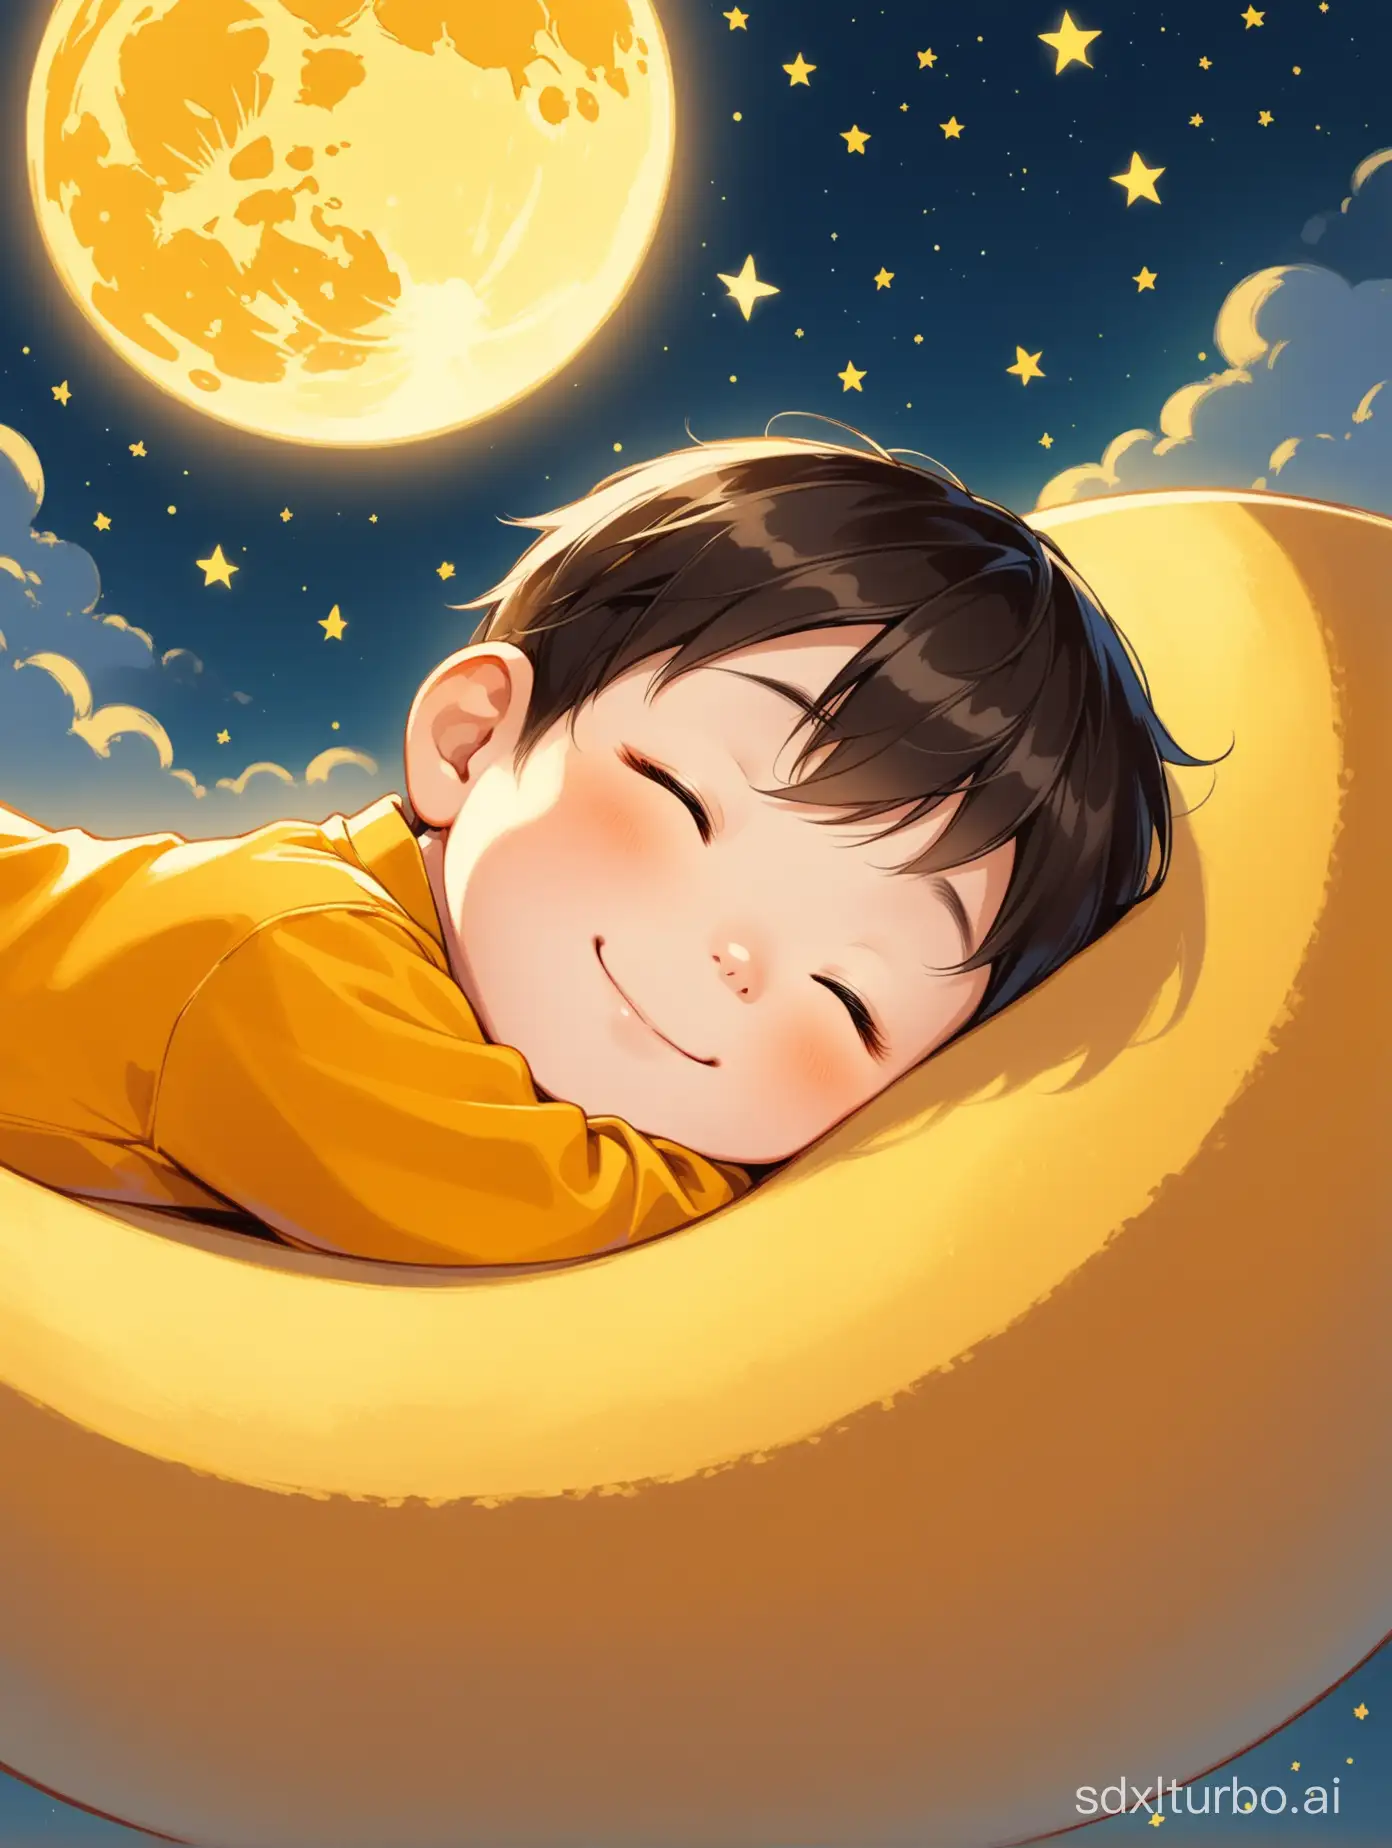 The cute seven-year-old Chinese boy lies sideways on the curved, yellow moon, with a smile on his face, sleeping soundly.